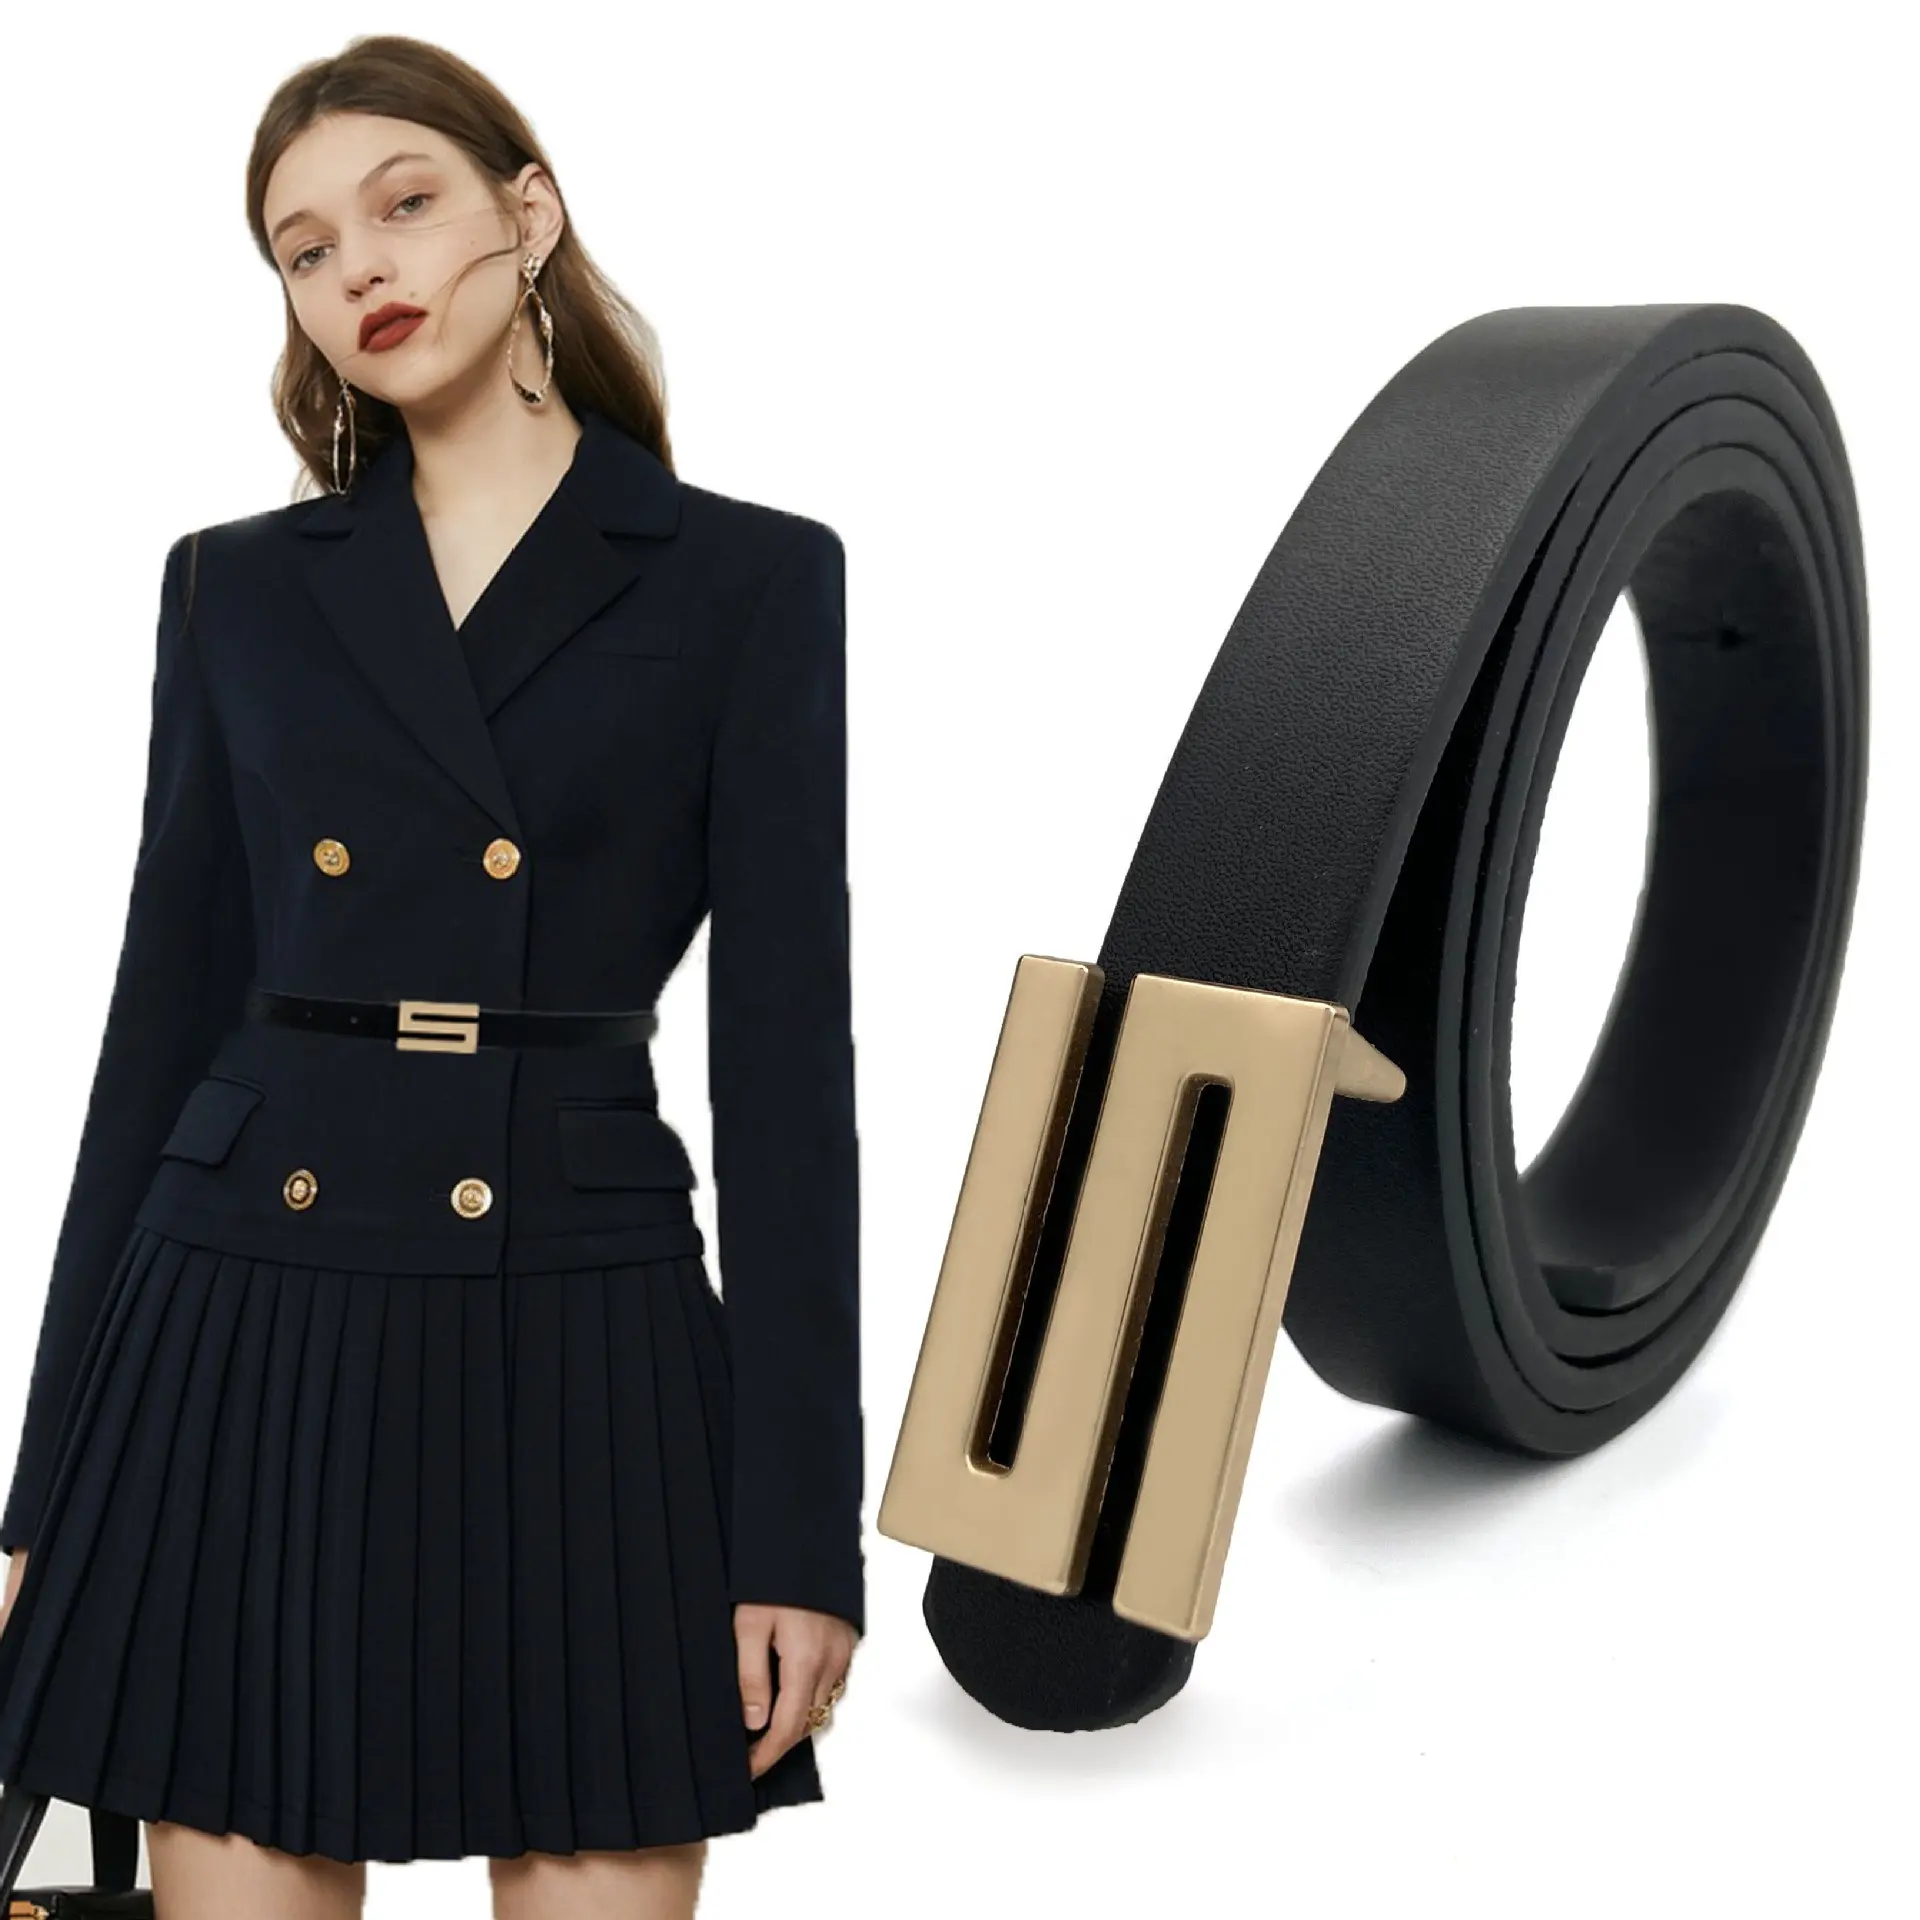 Casual Decorative Suit Dress Multi-color Fake Faux Golden S Buckle PU Leather Thin Belt for Ladies